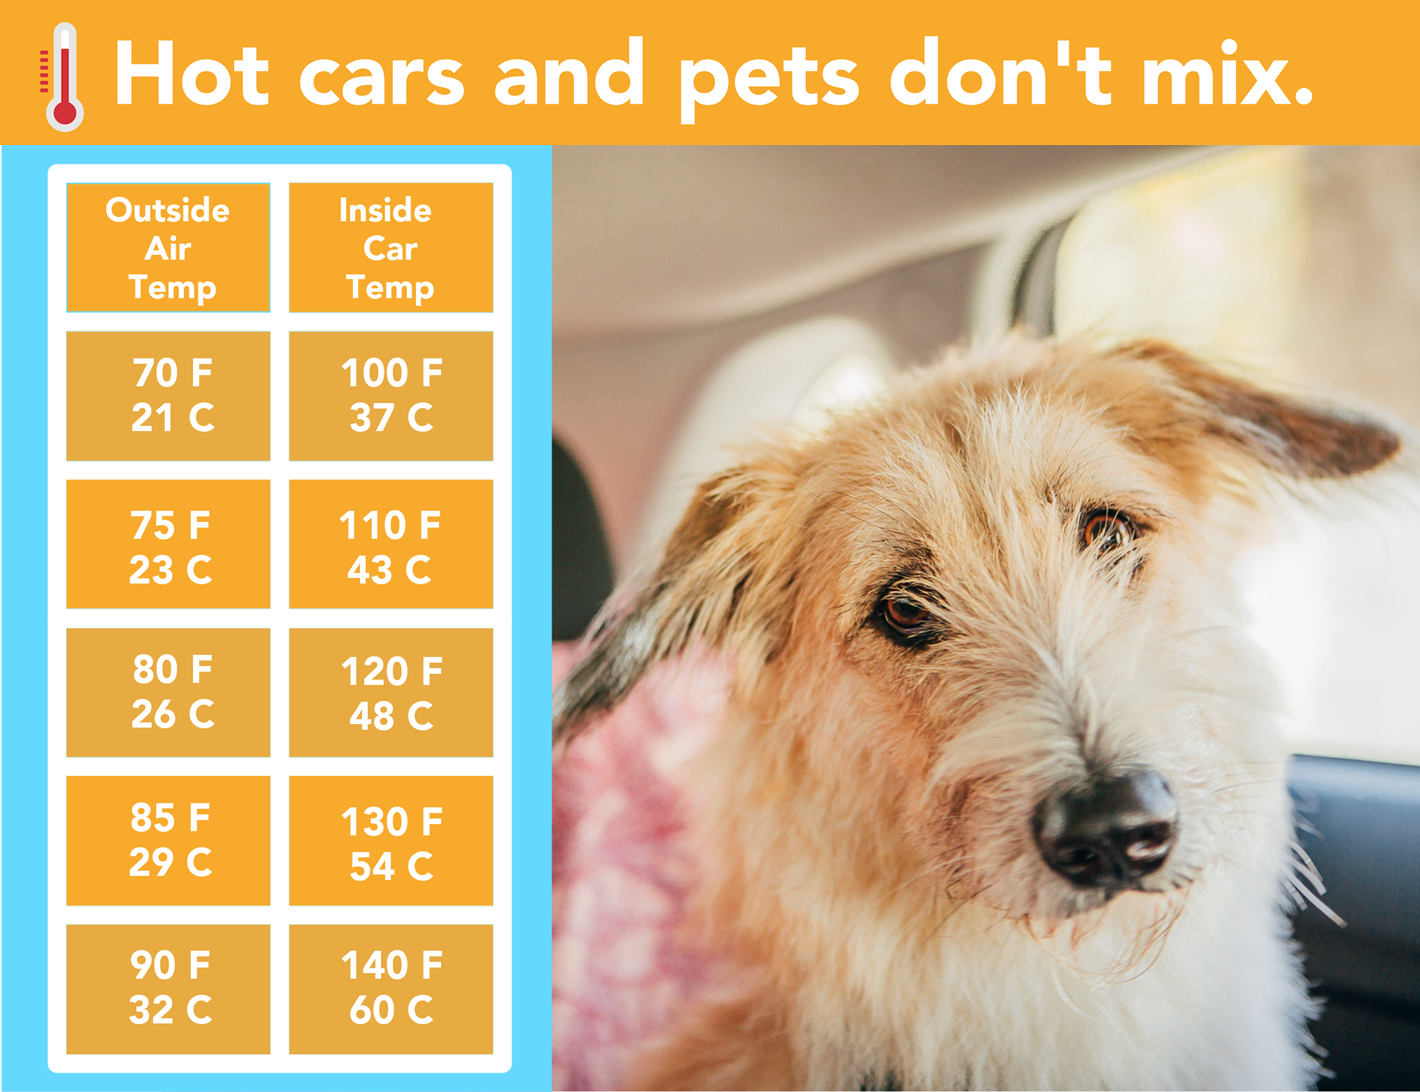 Hot cars and pets don't mix graphic